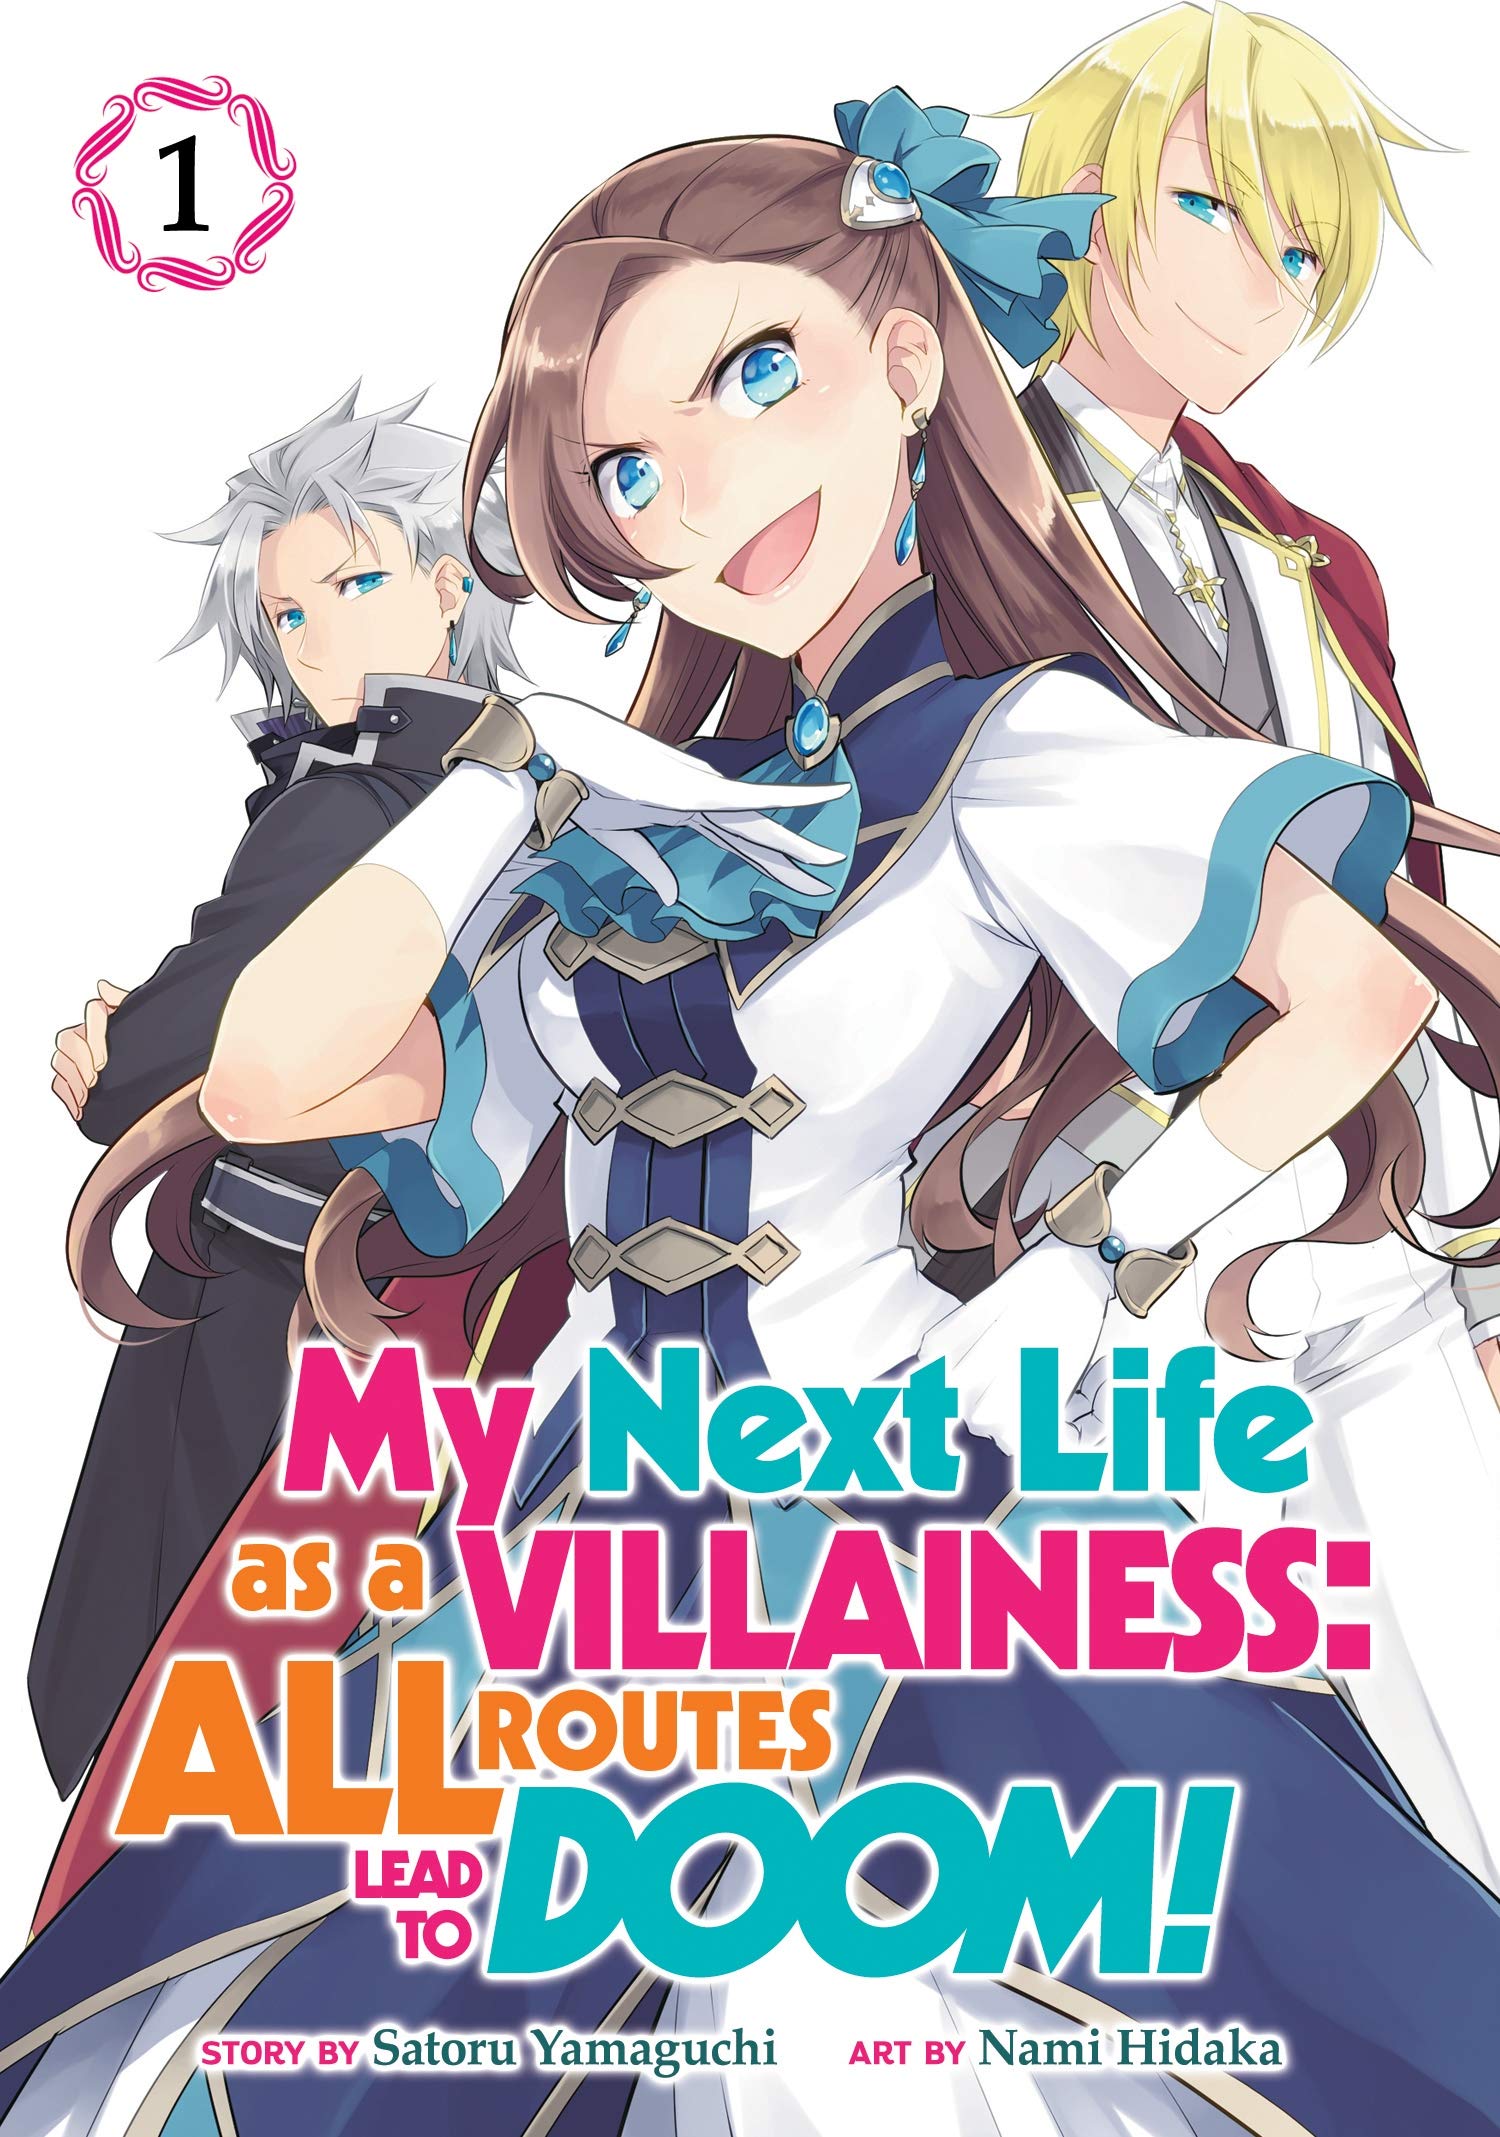 My Next Life as a Villainess: All Routes Lead to Doom! Movie release date  announced along with new key visual